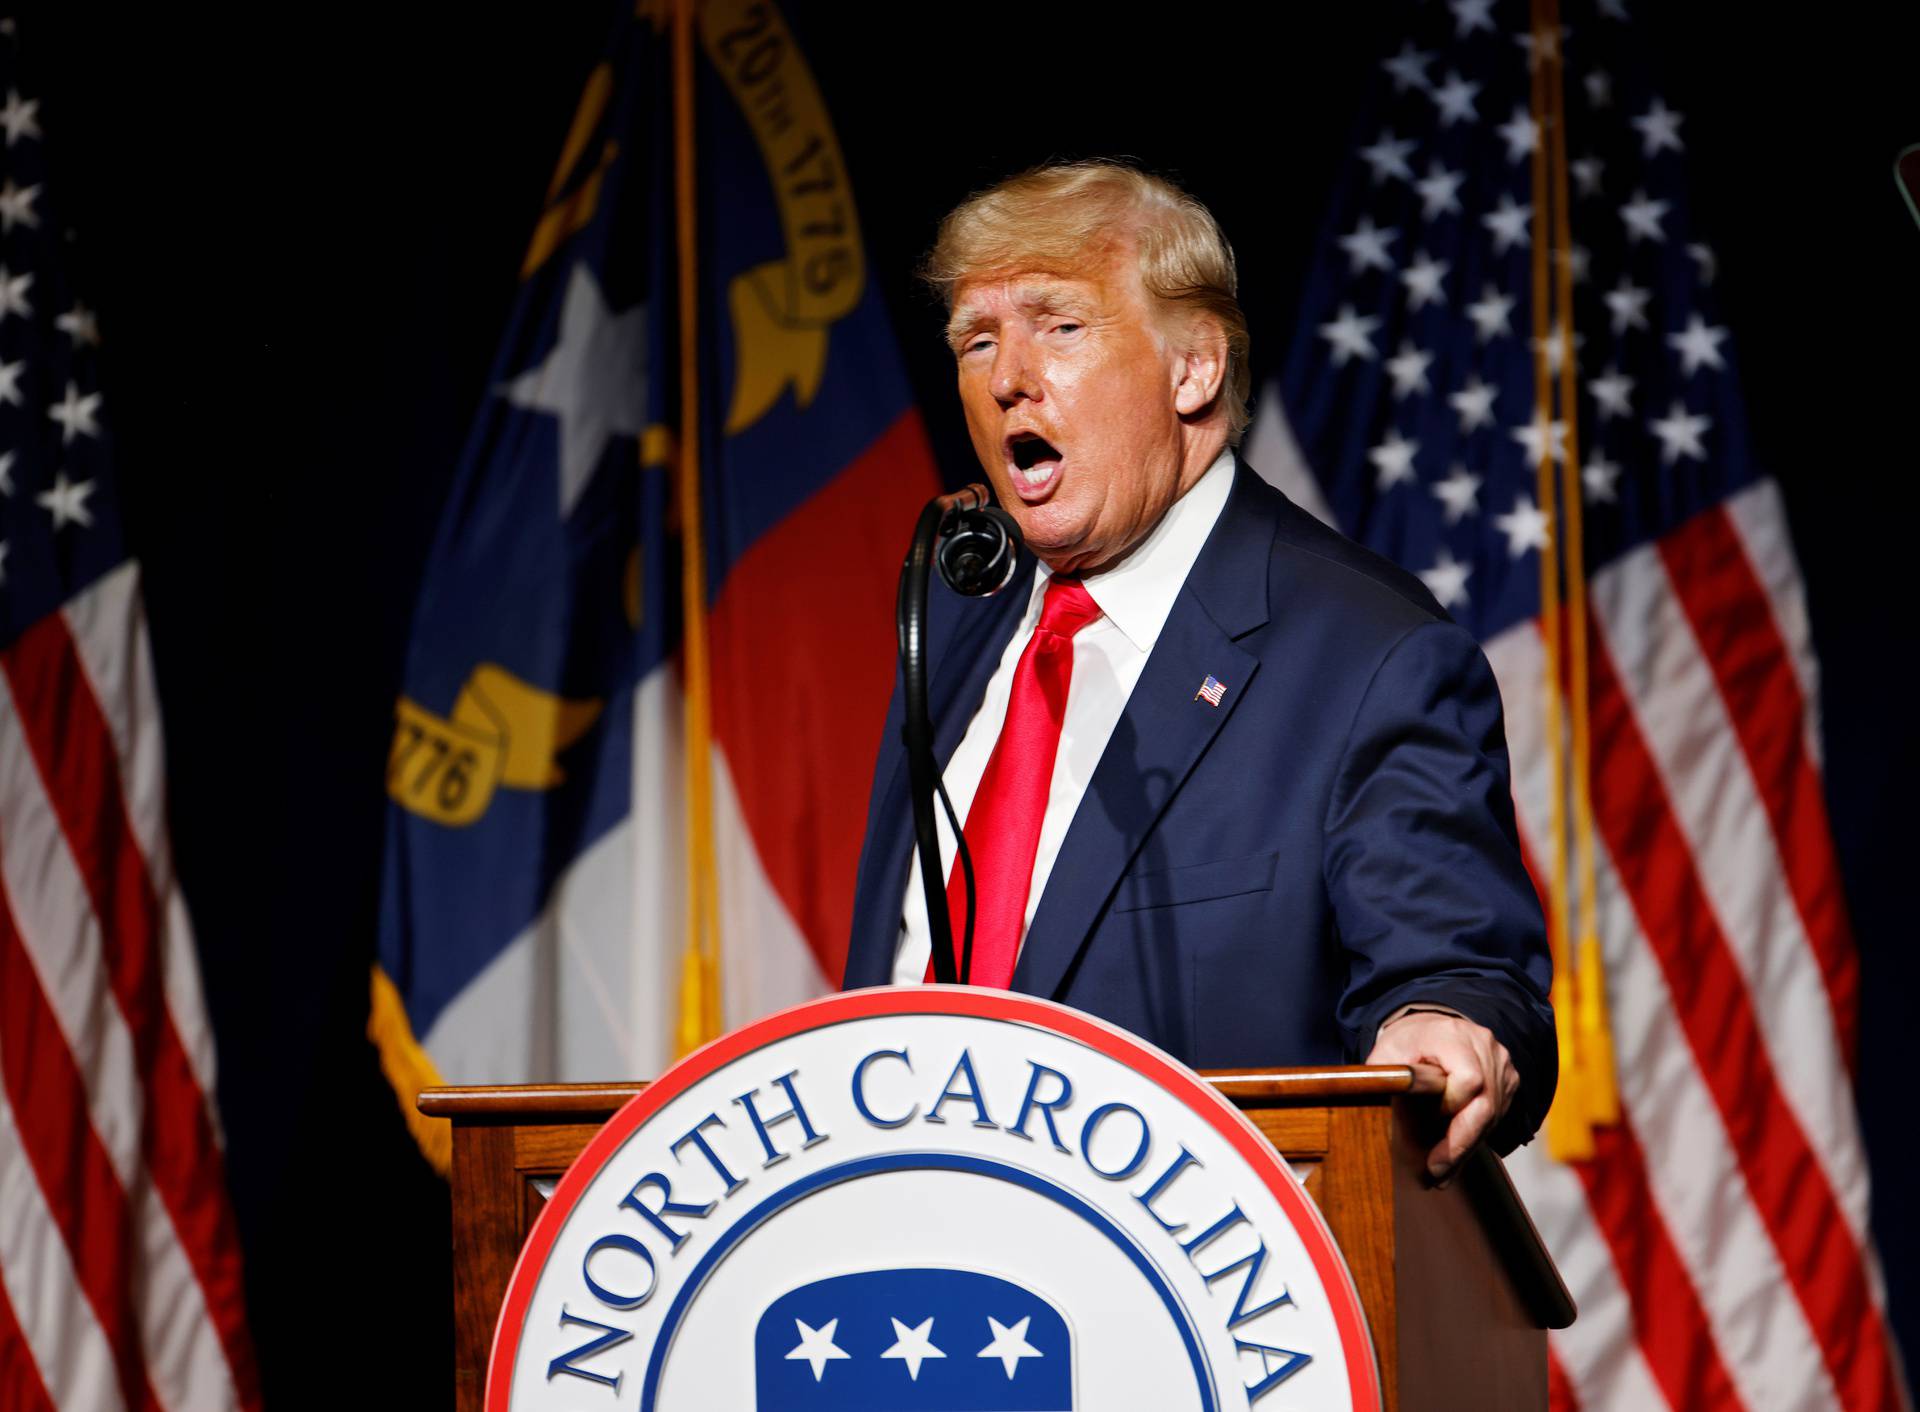 Former U.S. President Donald Trump at the North Carolina GOP convention dinner in Greenville